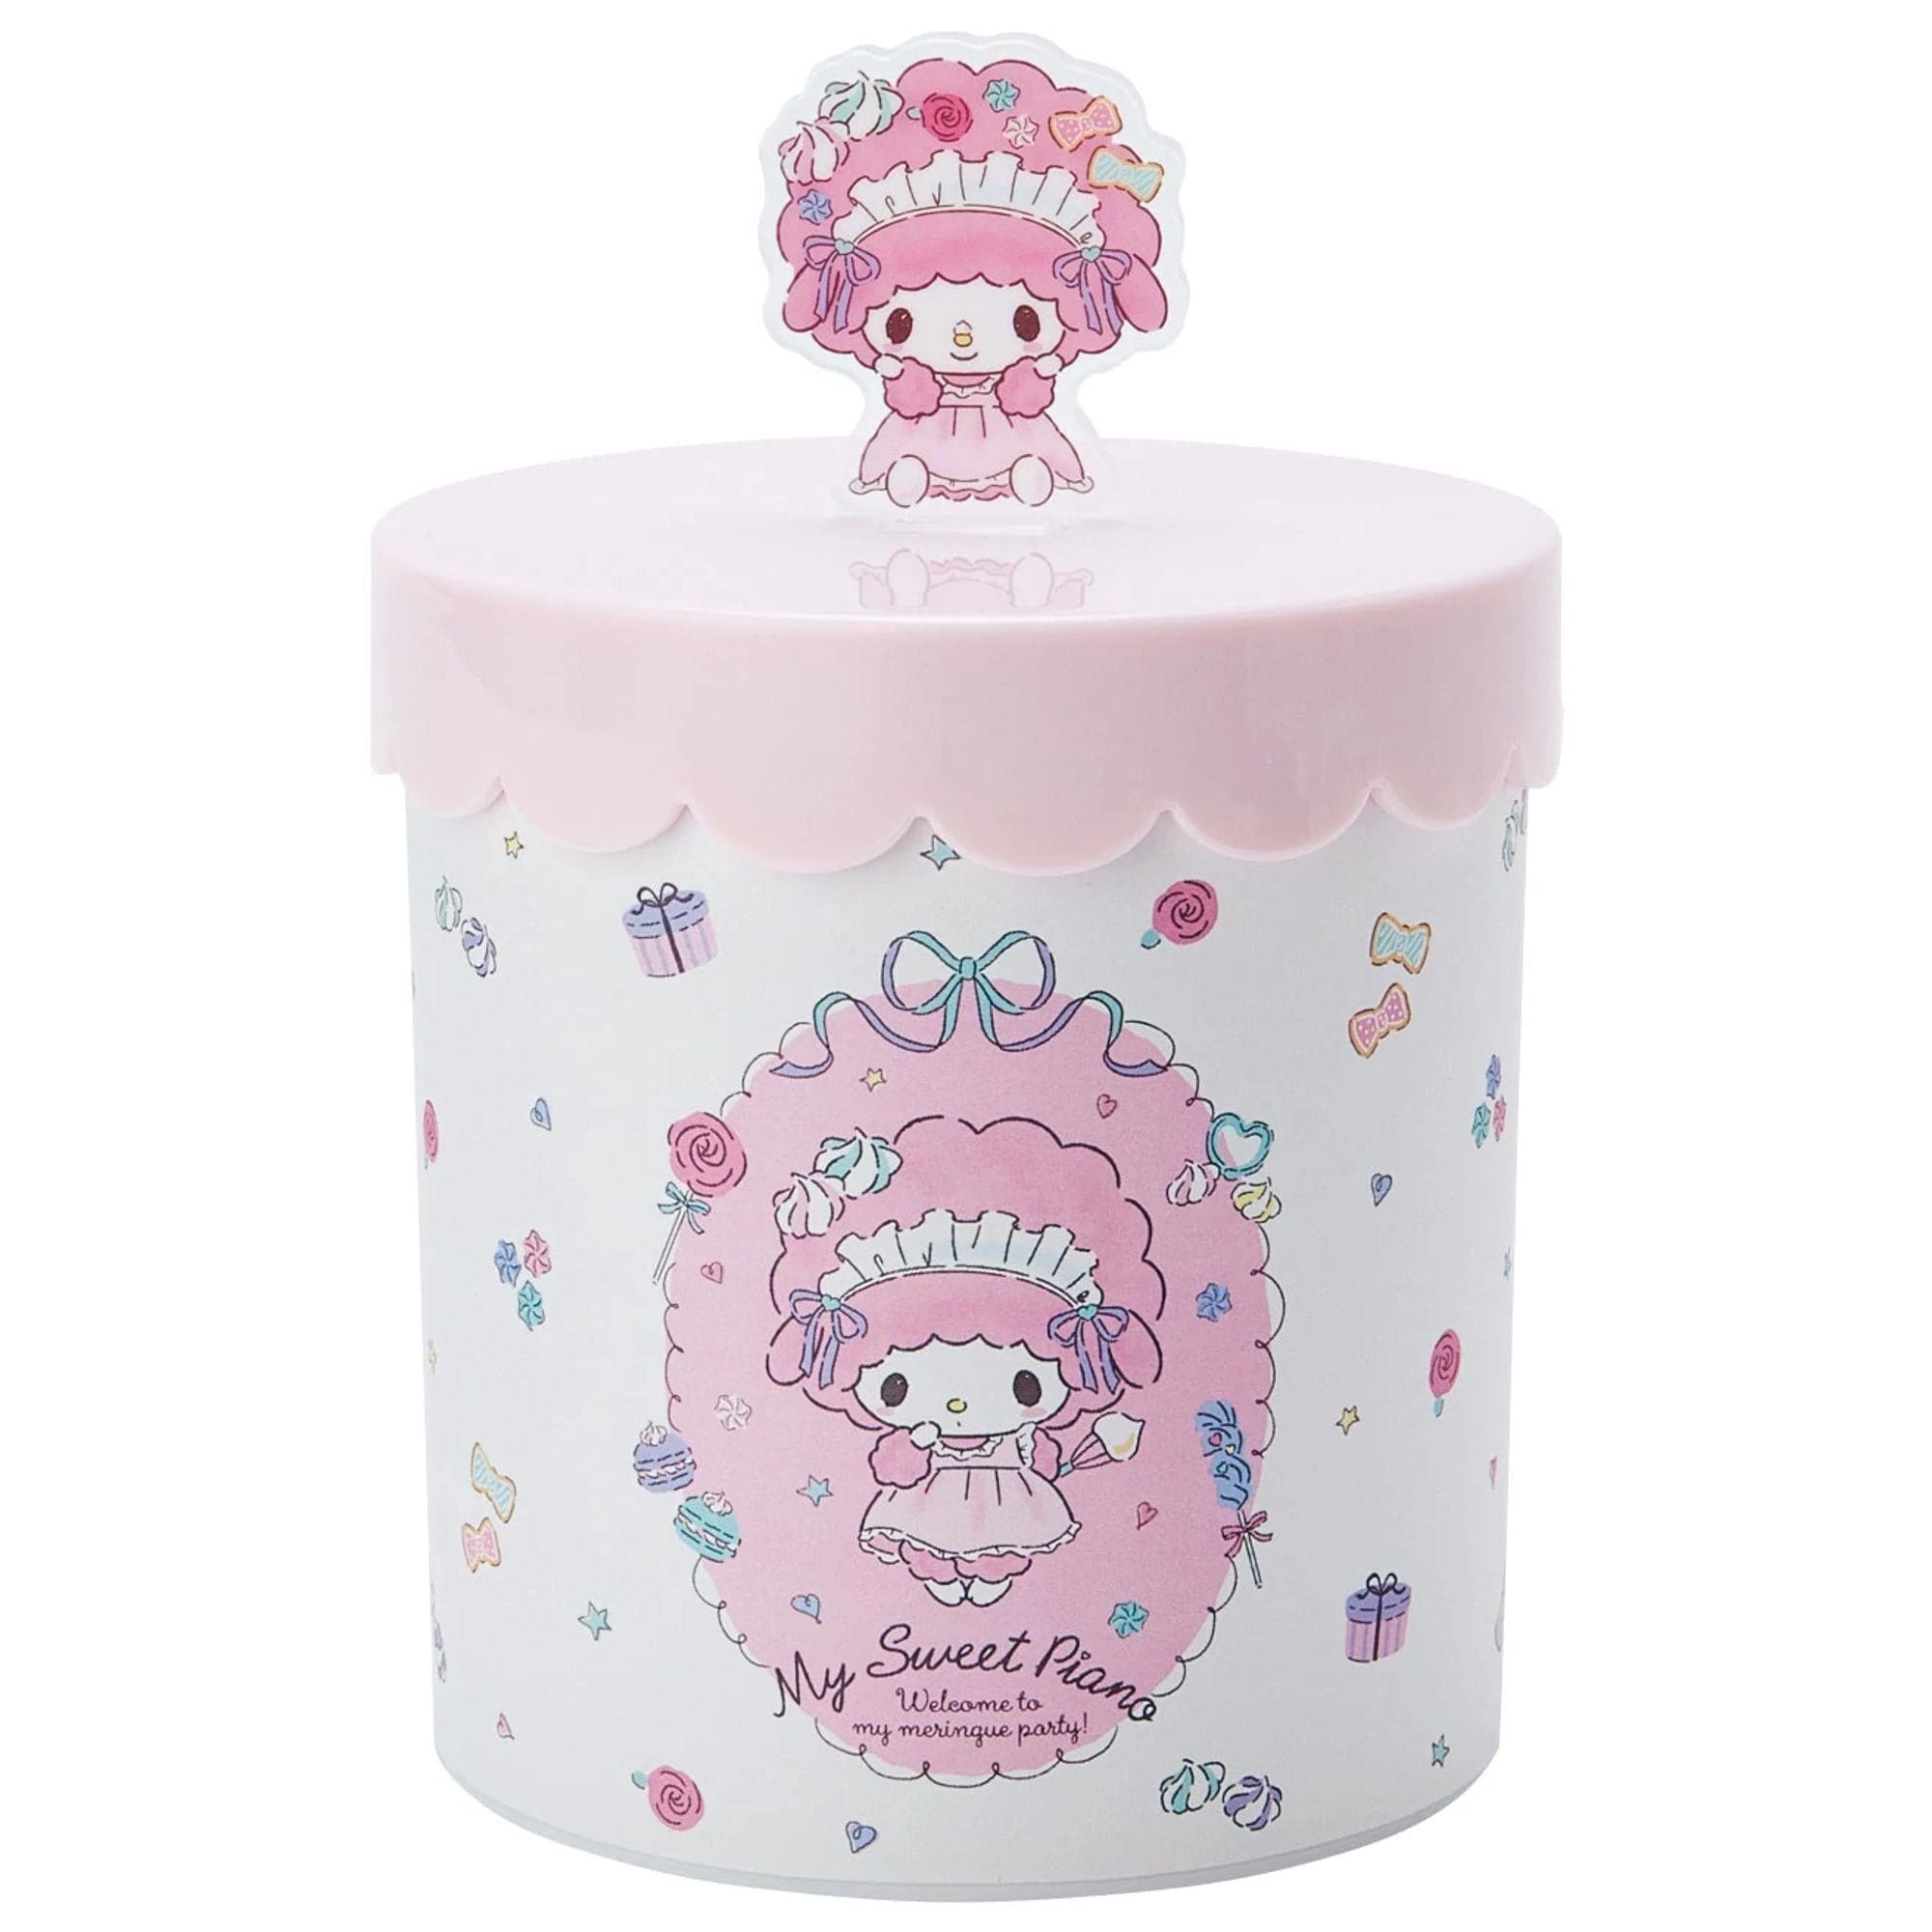 Enesco My Piano Good Morning Canister with Mascot Lid Kawaii Gifts